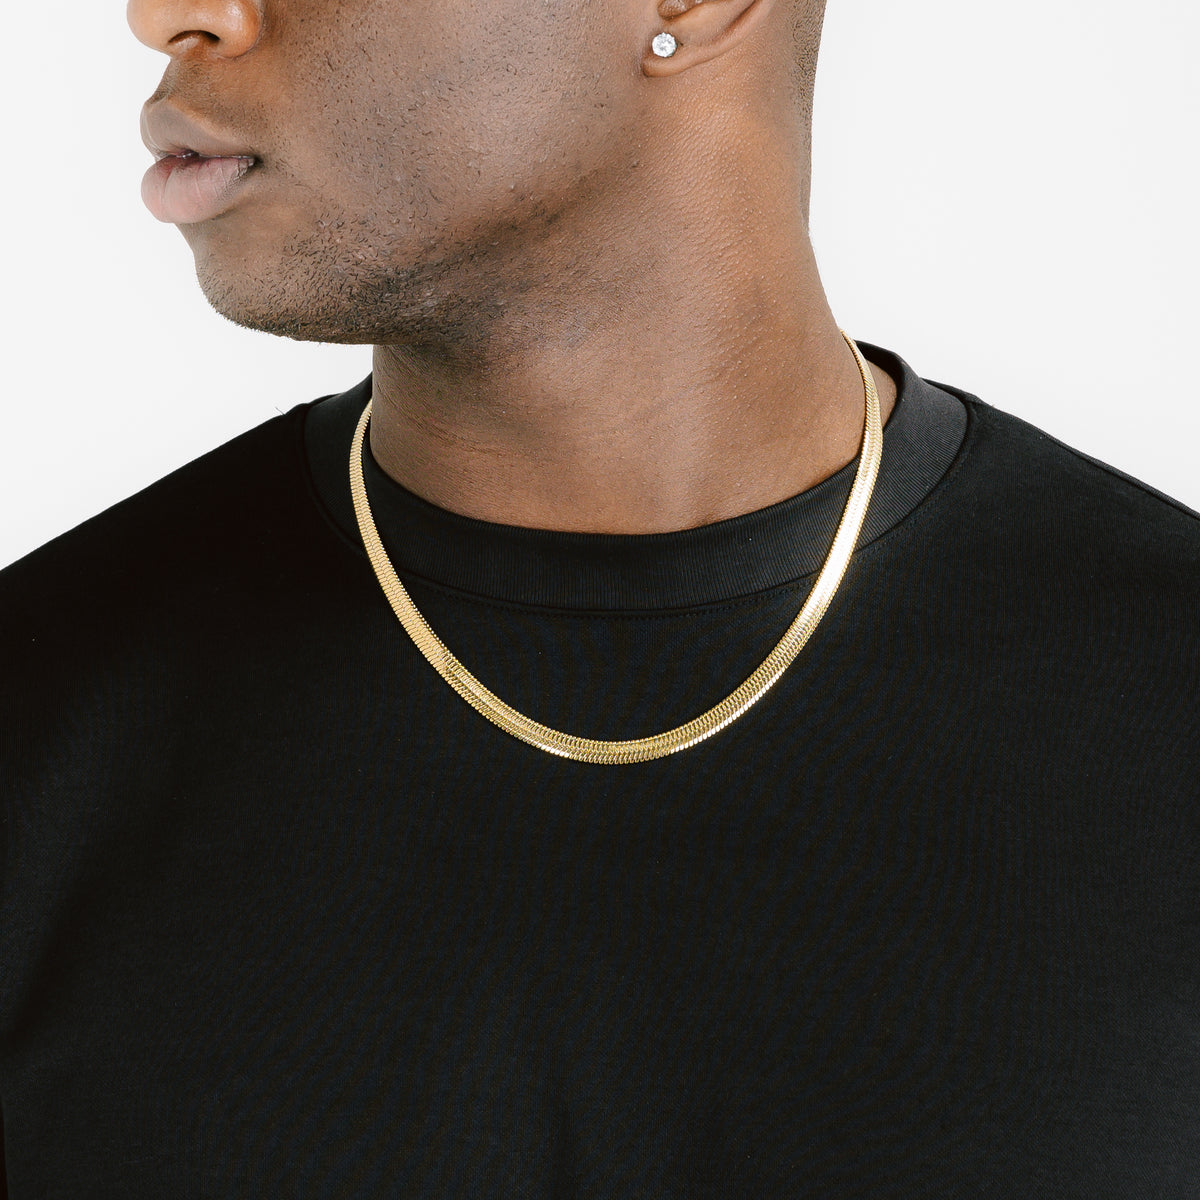 18k Yellow Gold Filled Herringbone Chain Necklace For Men Classic Solid  Accessory, 23.6 Inches Length From Blingfashion, $16.09 | DHgate.Com